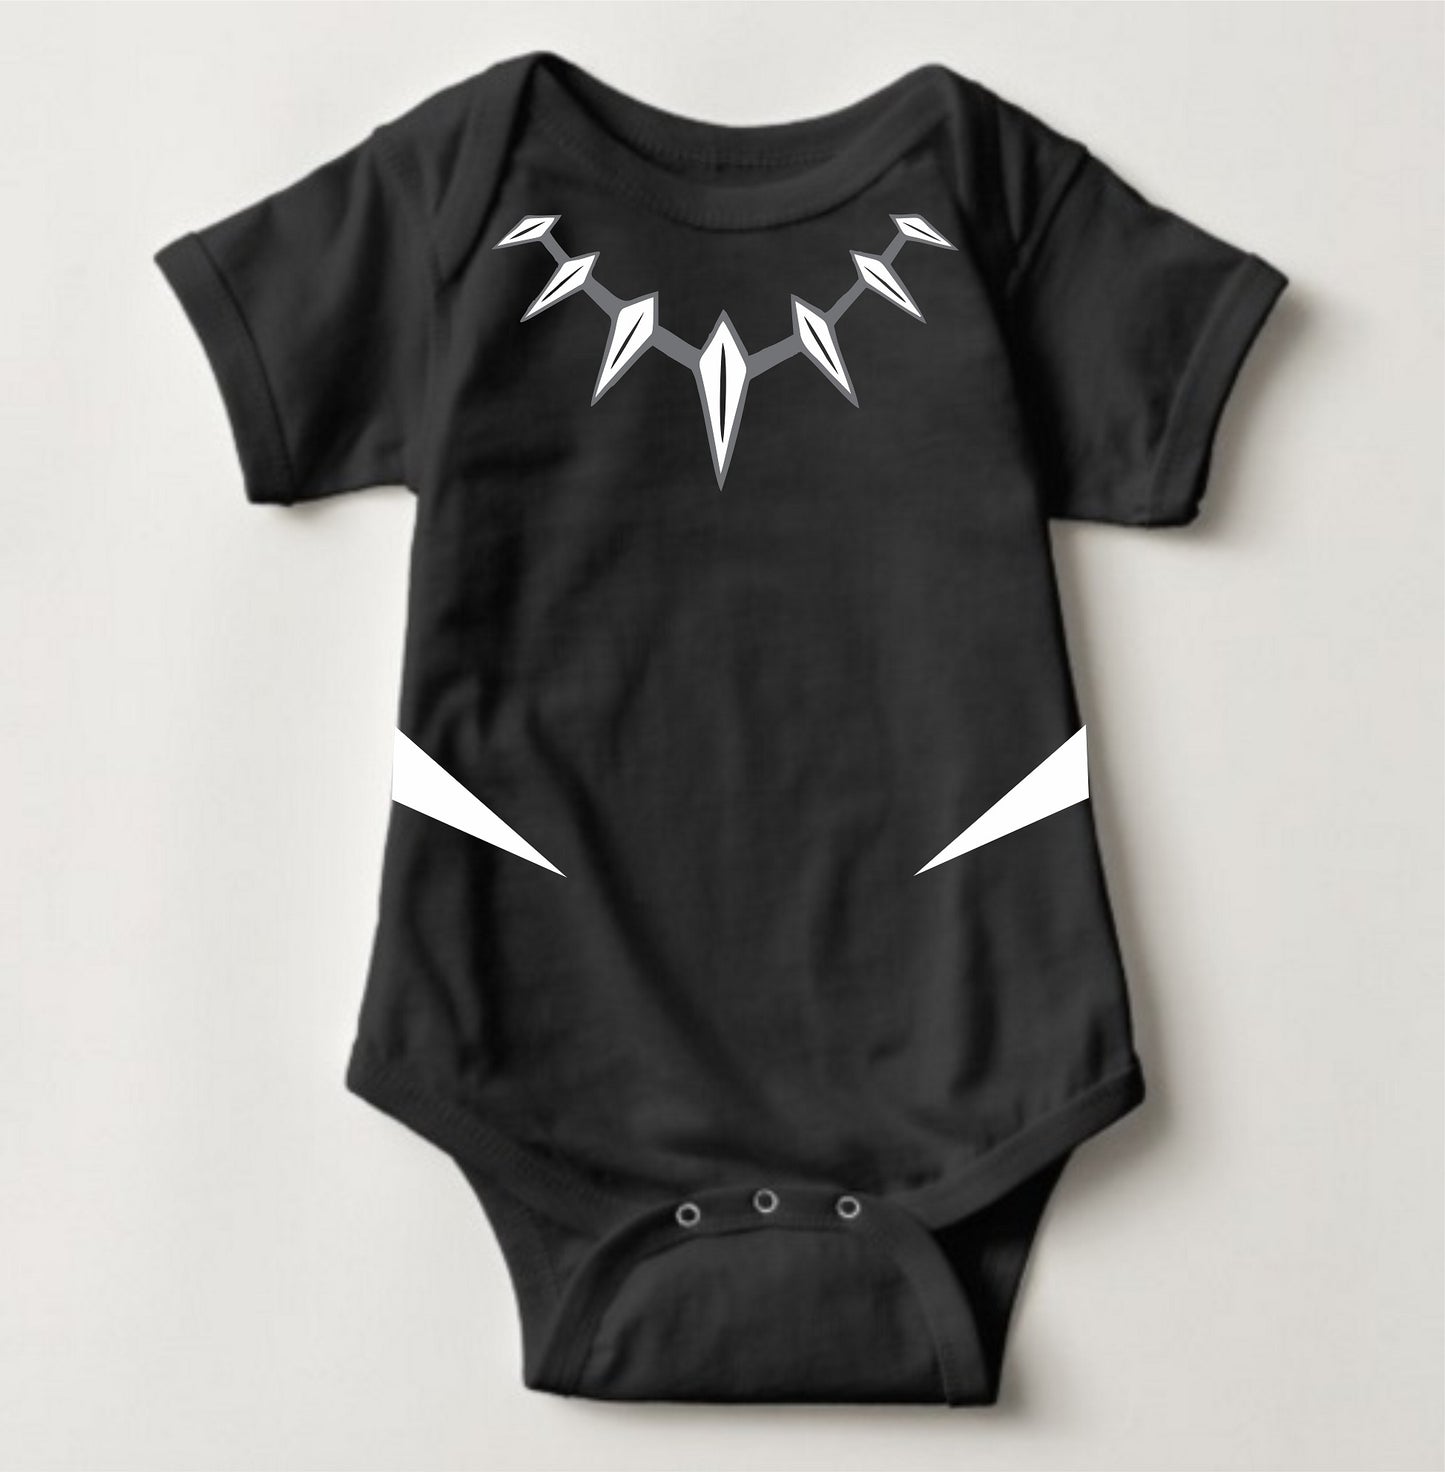 Black Panther with Mask Set - Baby Superhero Onesies with FREE Name Back Print